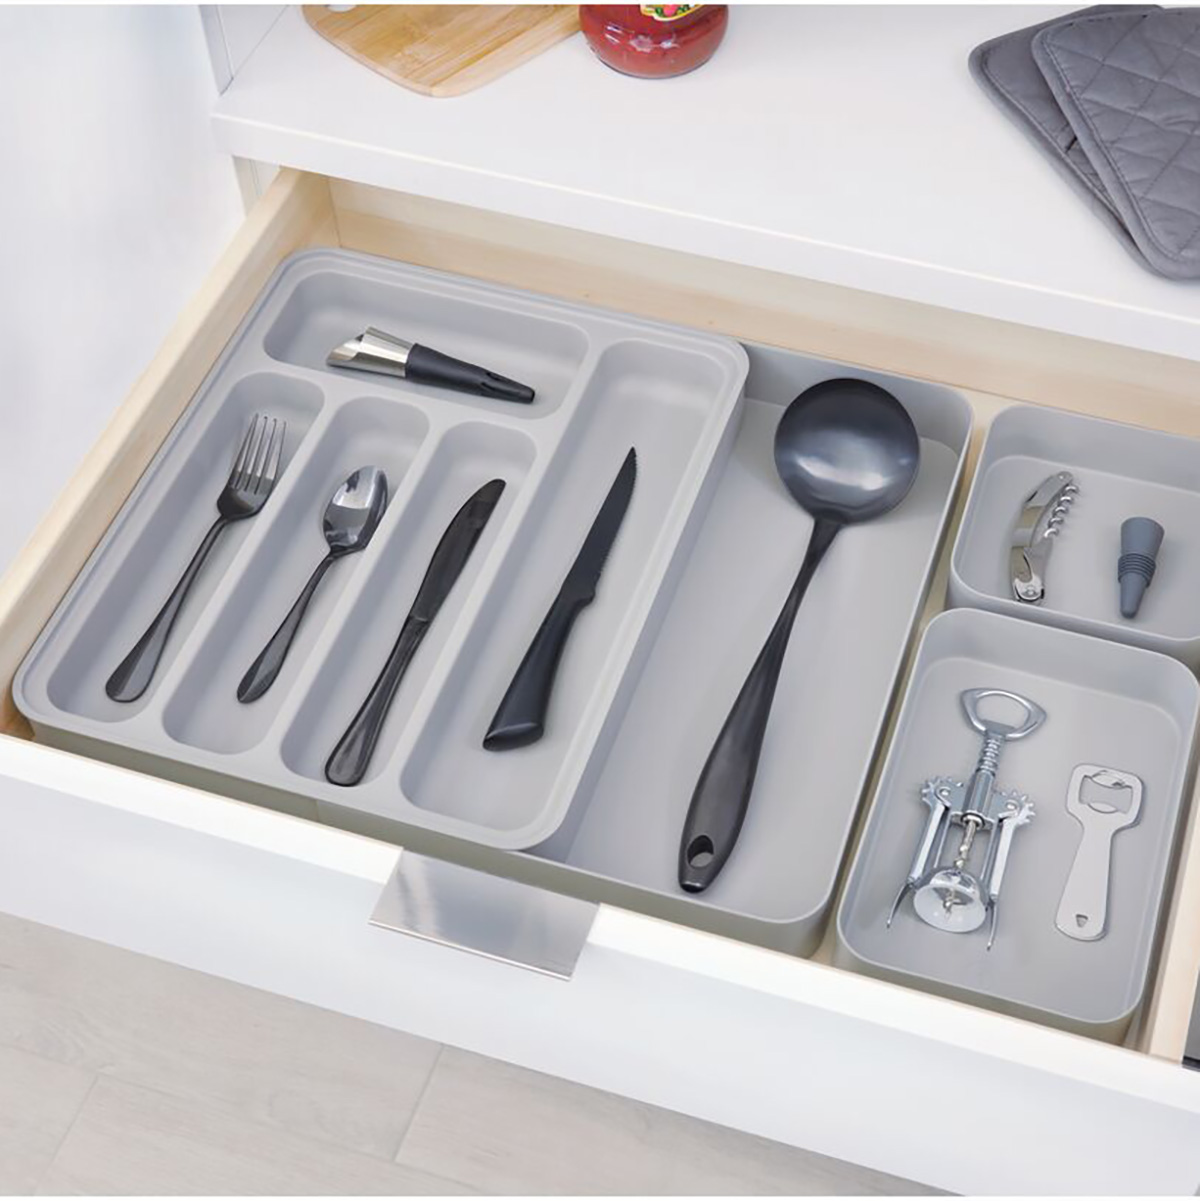 https://www.containerstore.com/catalogimages/453756/10088430-Expandable%20Utensil%20Tray%20Gra.jpg